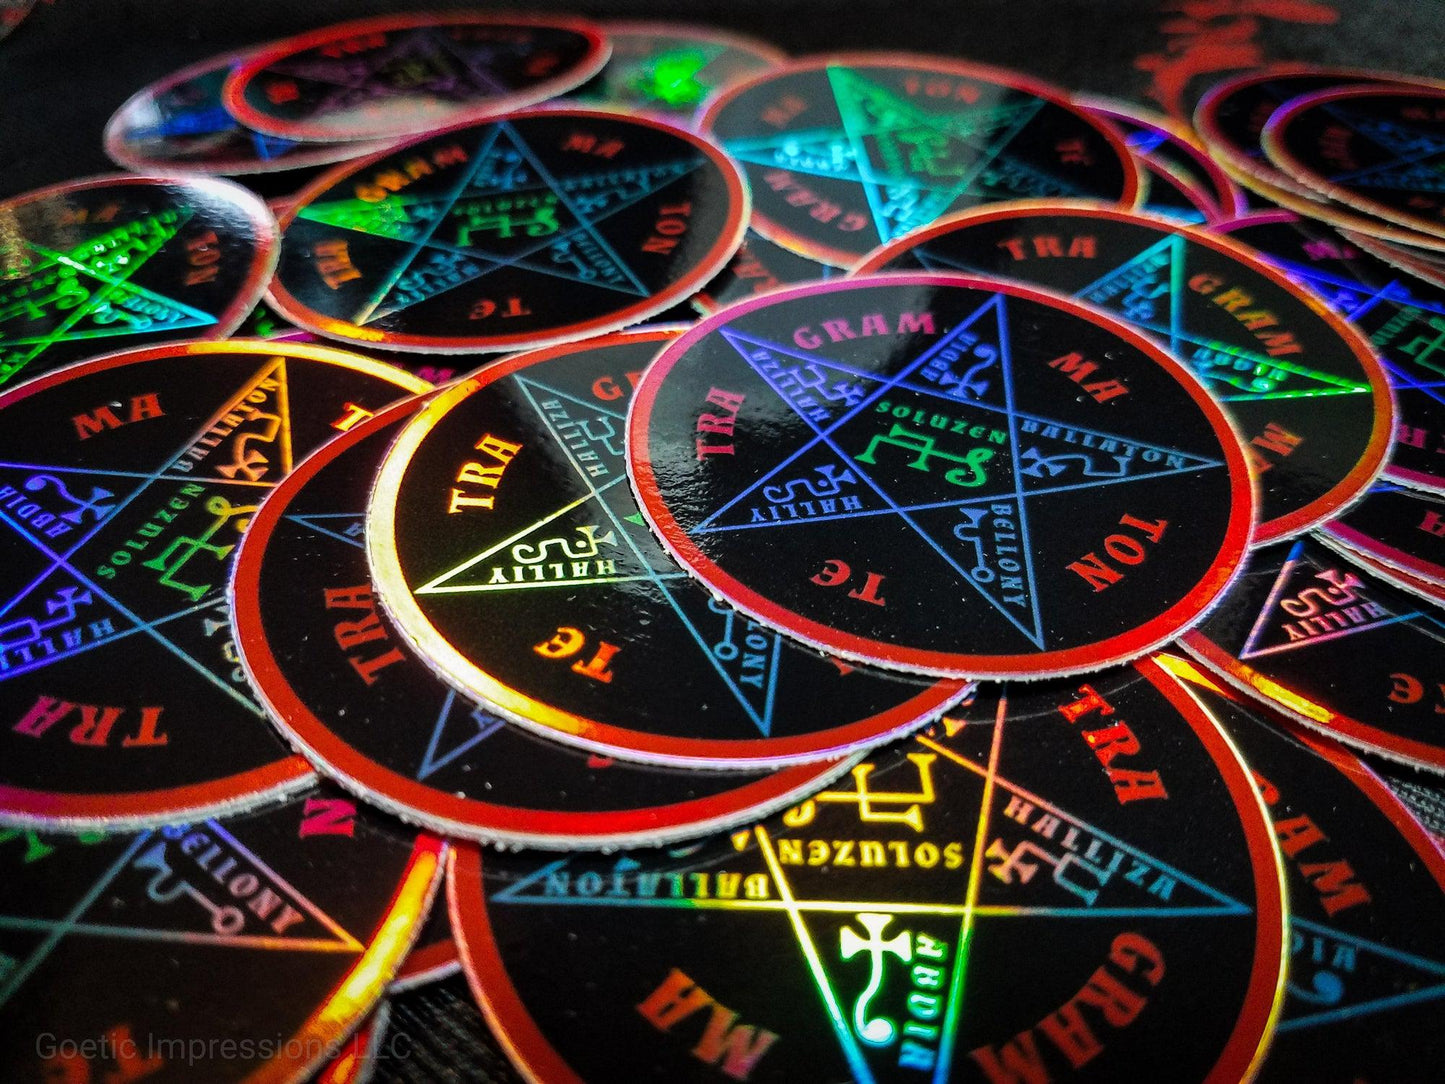 Pentacle of Solomon holographic stickers.